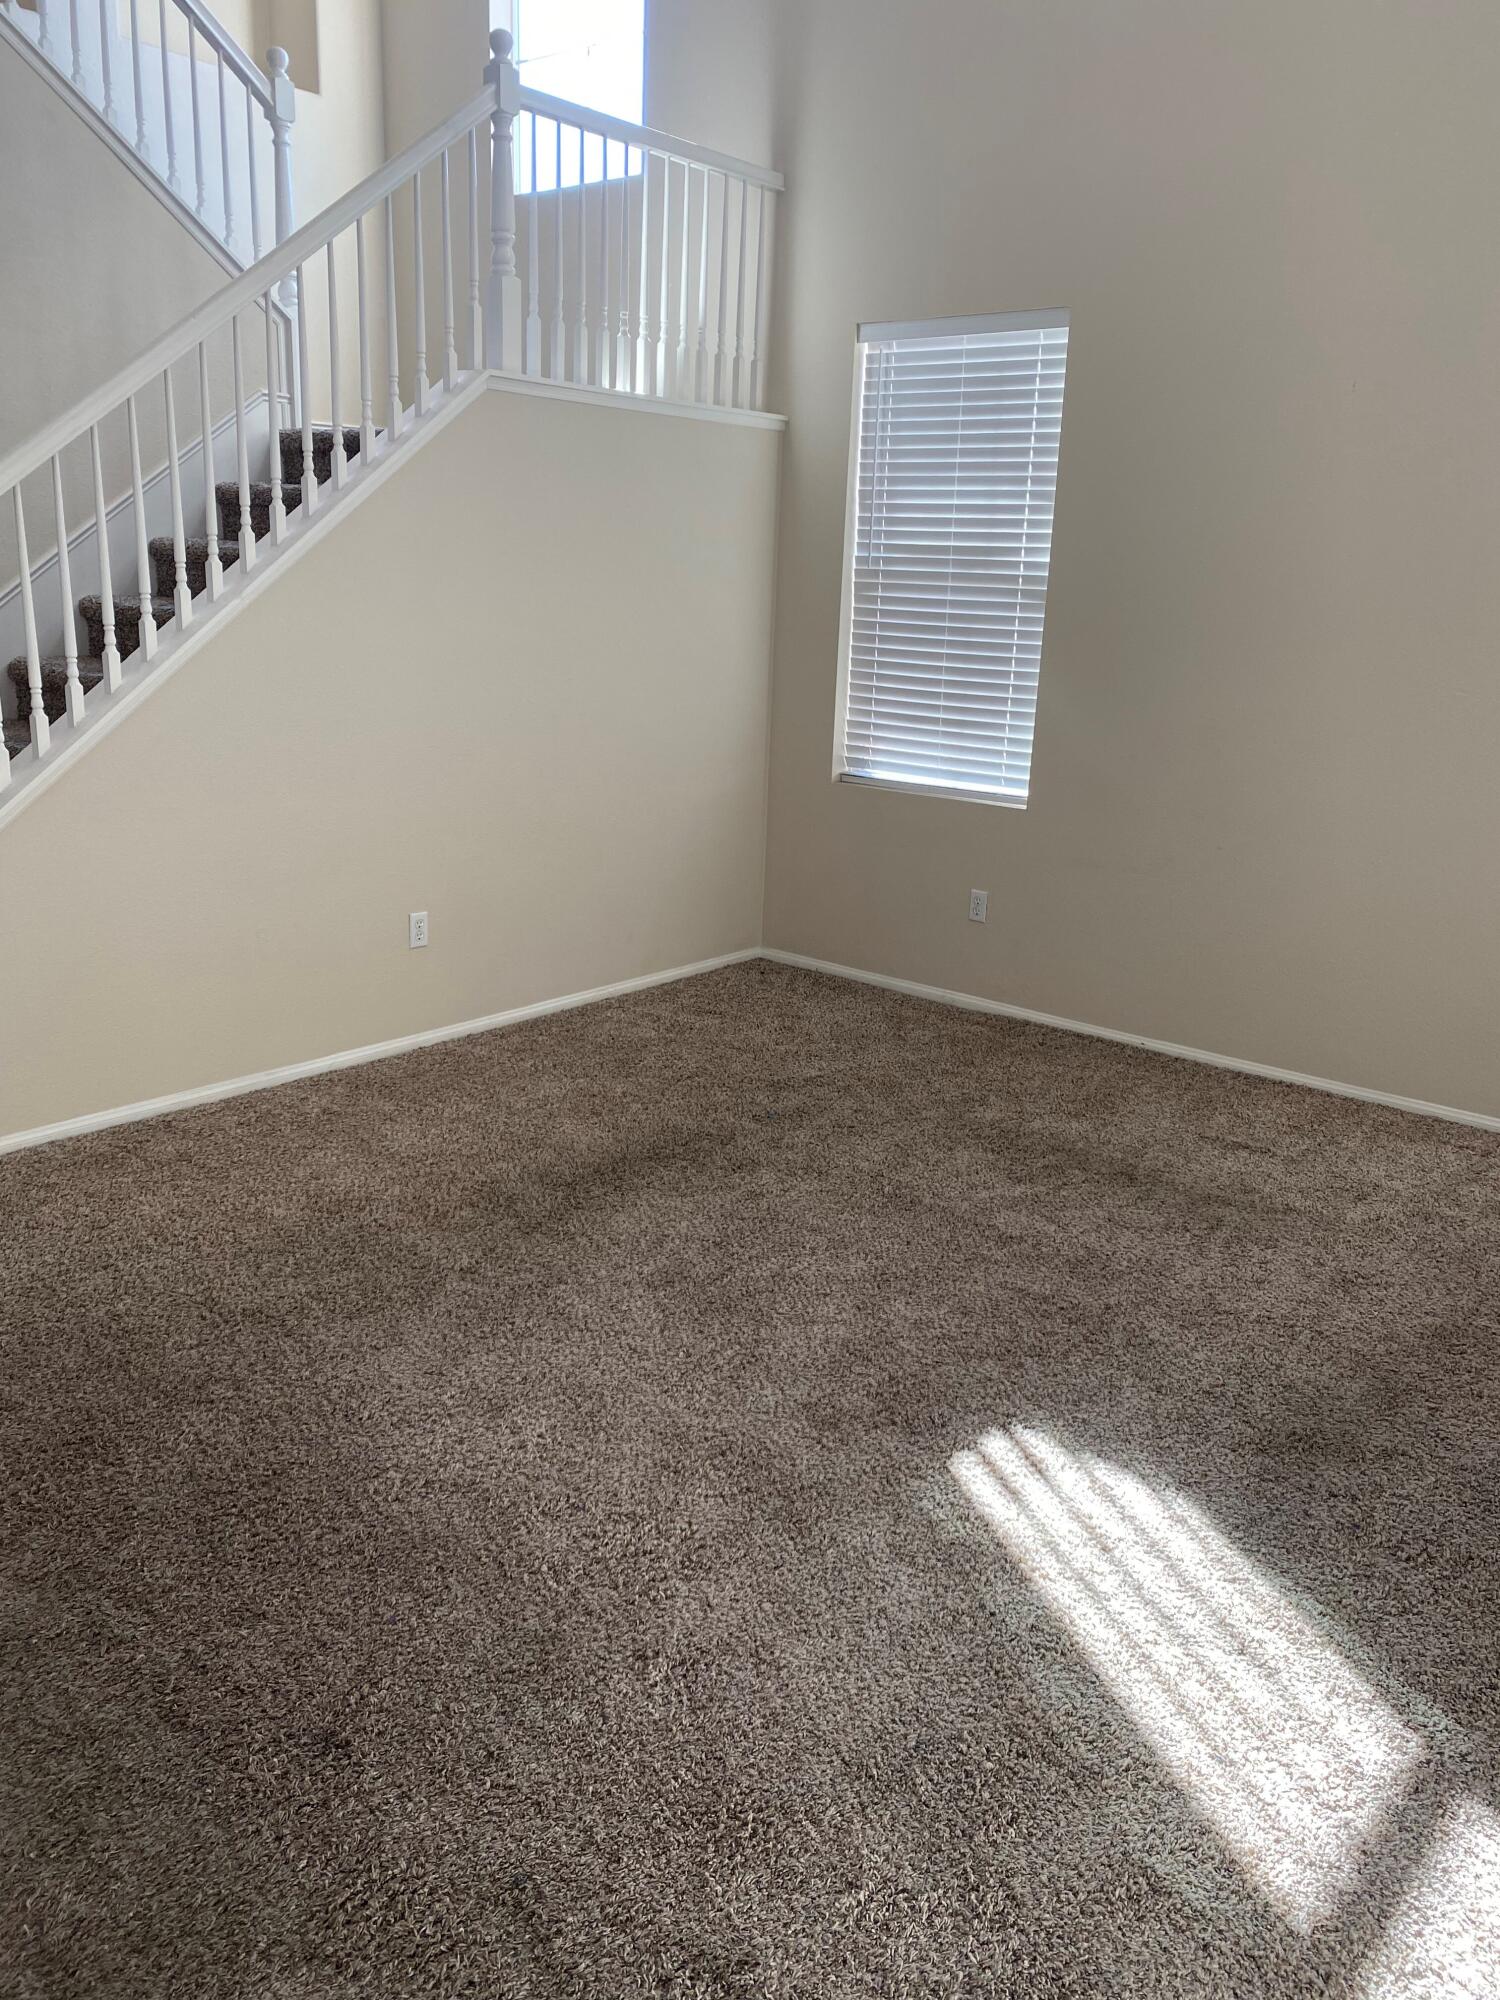 a view of an empty room with stairs